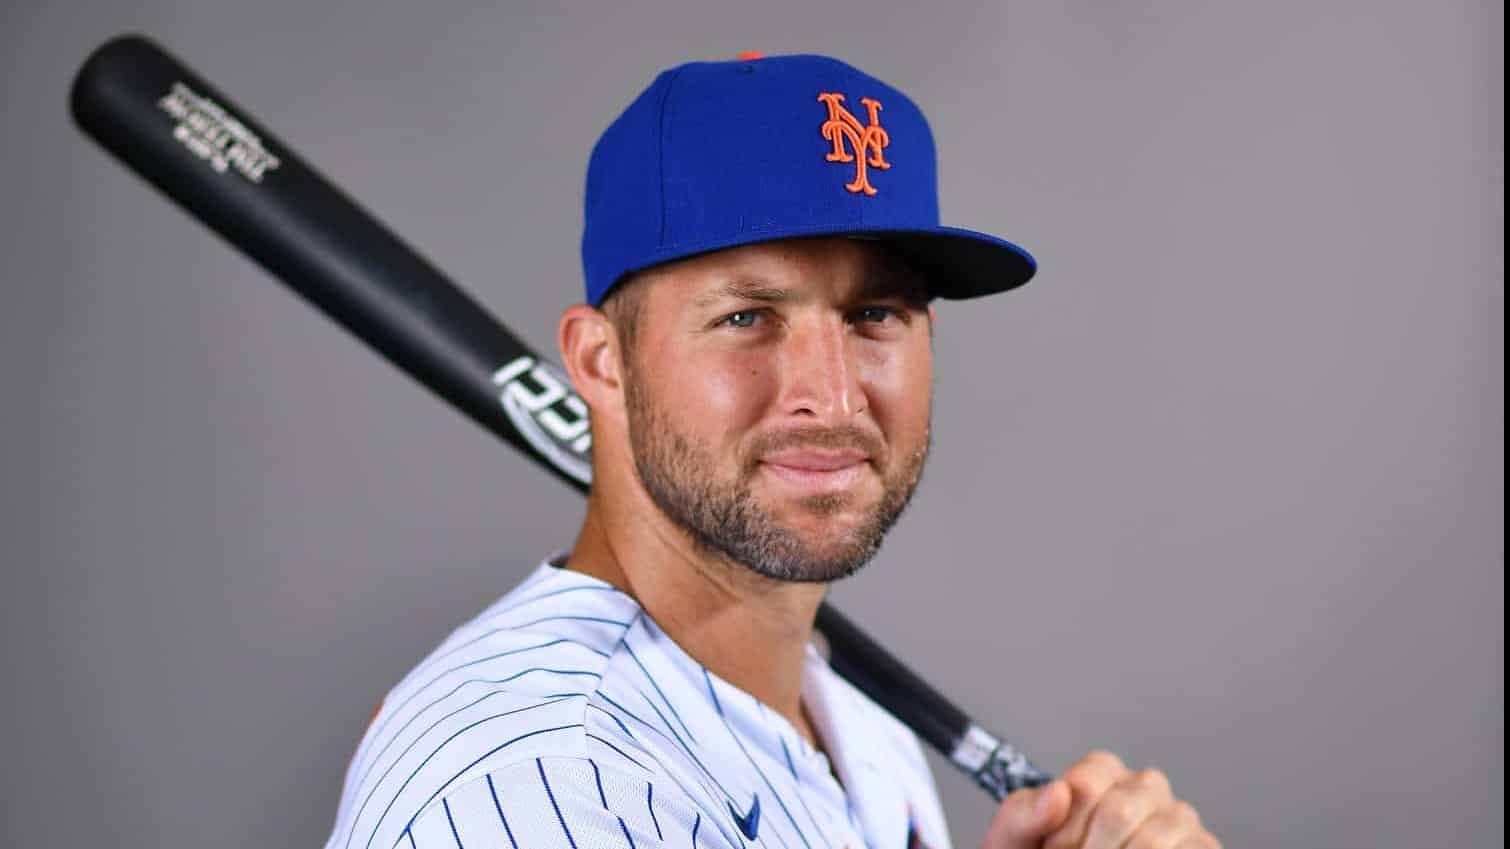 PORT ST. LUCIE, FLORIDA - FEBRUARY 20: Tim Tebow #85 of the New York Mets poses for a photo during Photo Day at Clover Park on February 20, 2020 in Port St. Lucie, Florida.